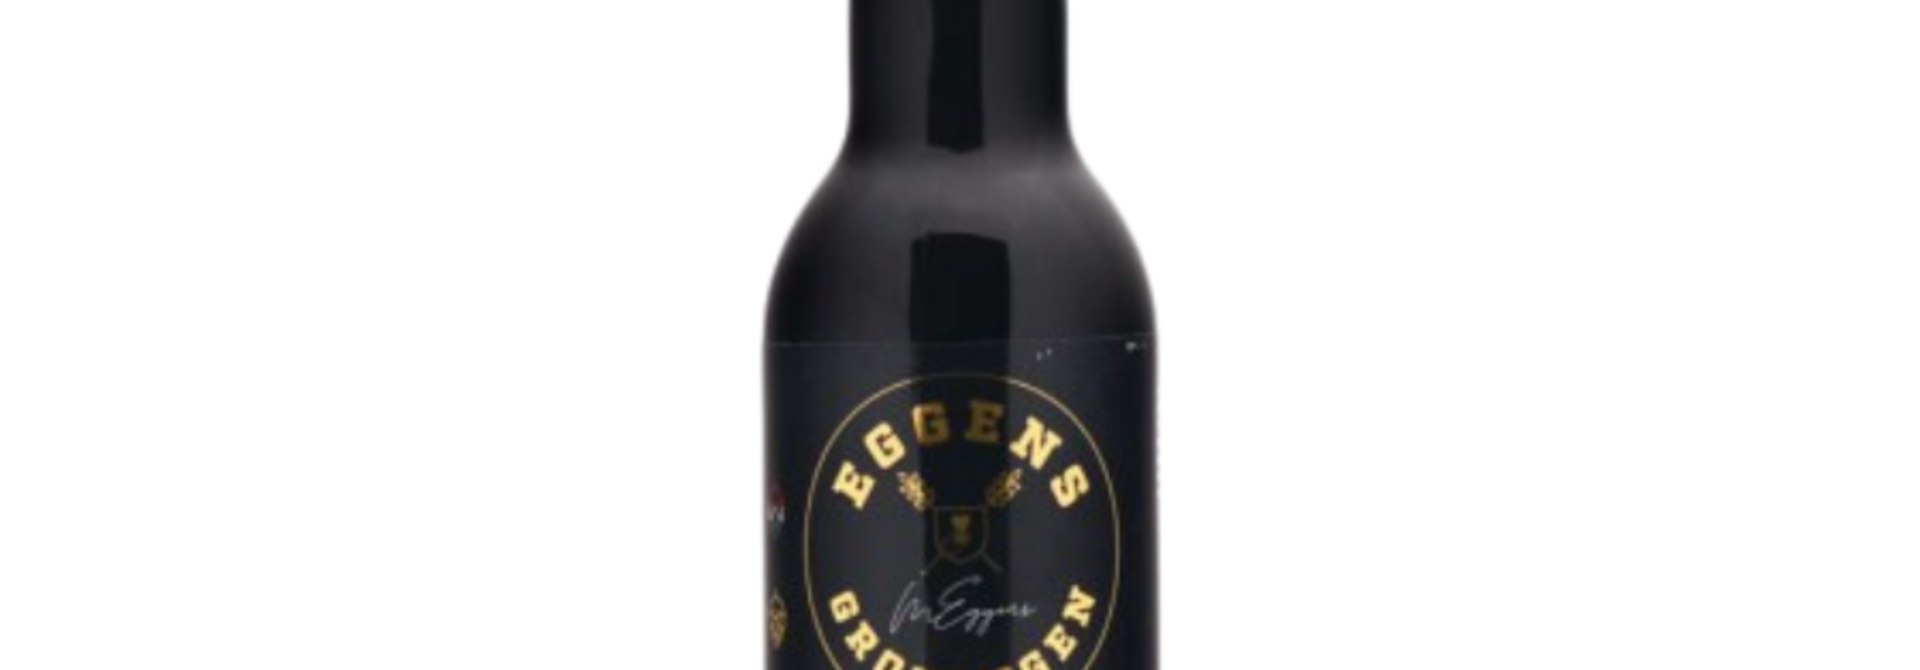 Eggens Russian Imperial Stout 33cl 11%